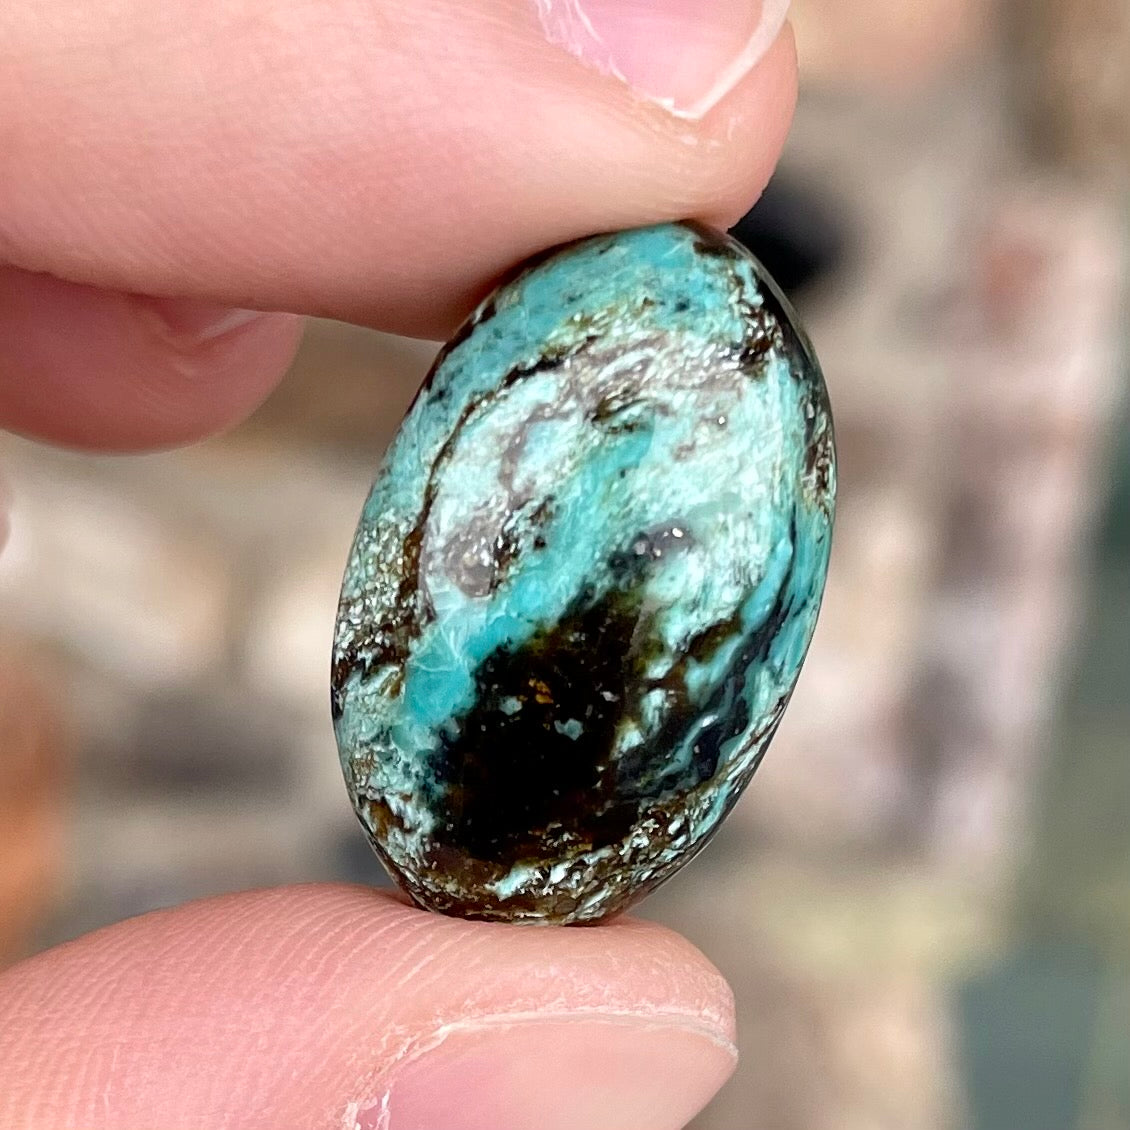 A loose, oval cabochon cut Royston turquoise stone from Nevada.